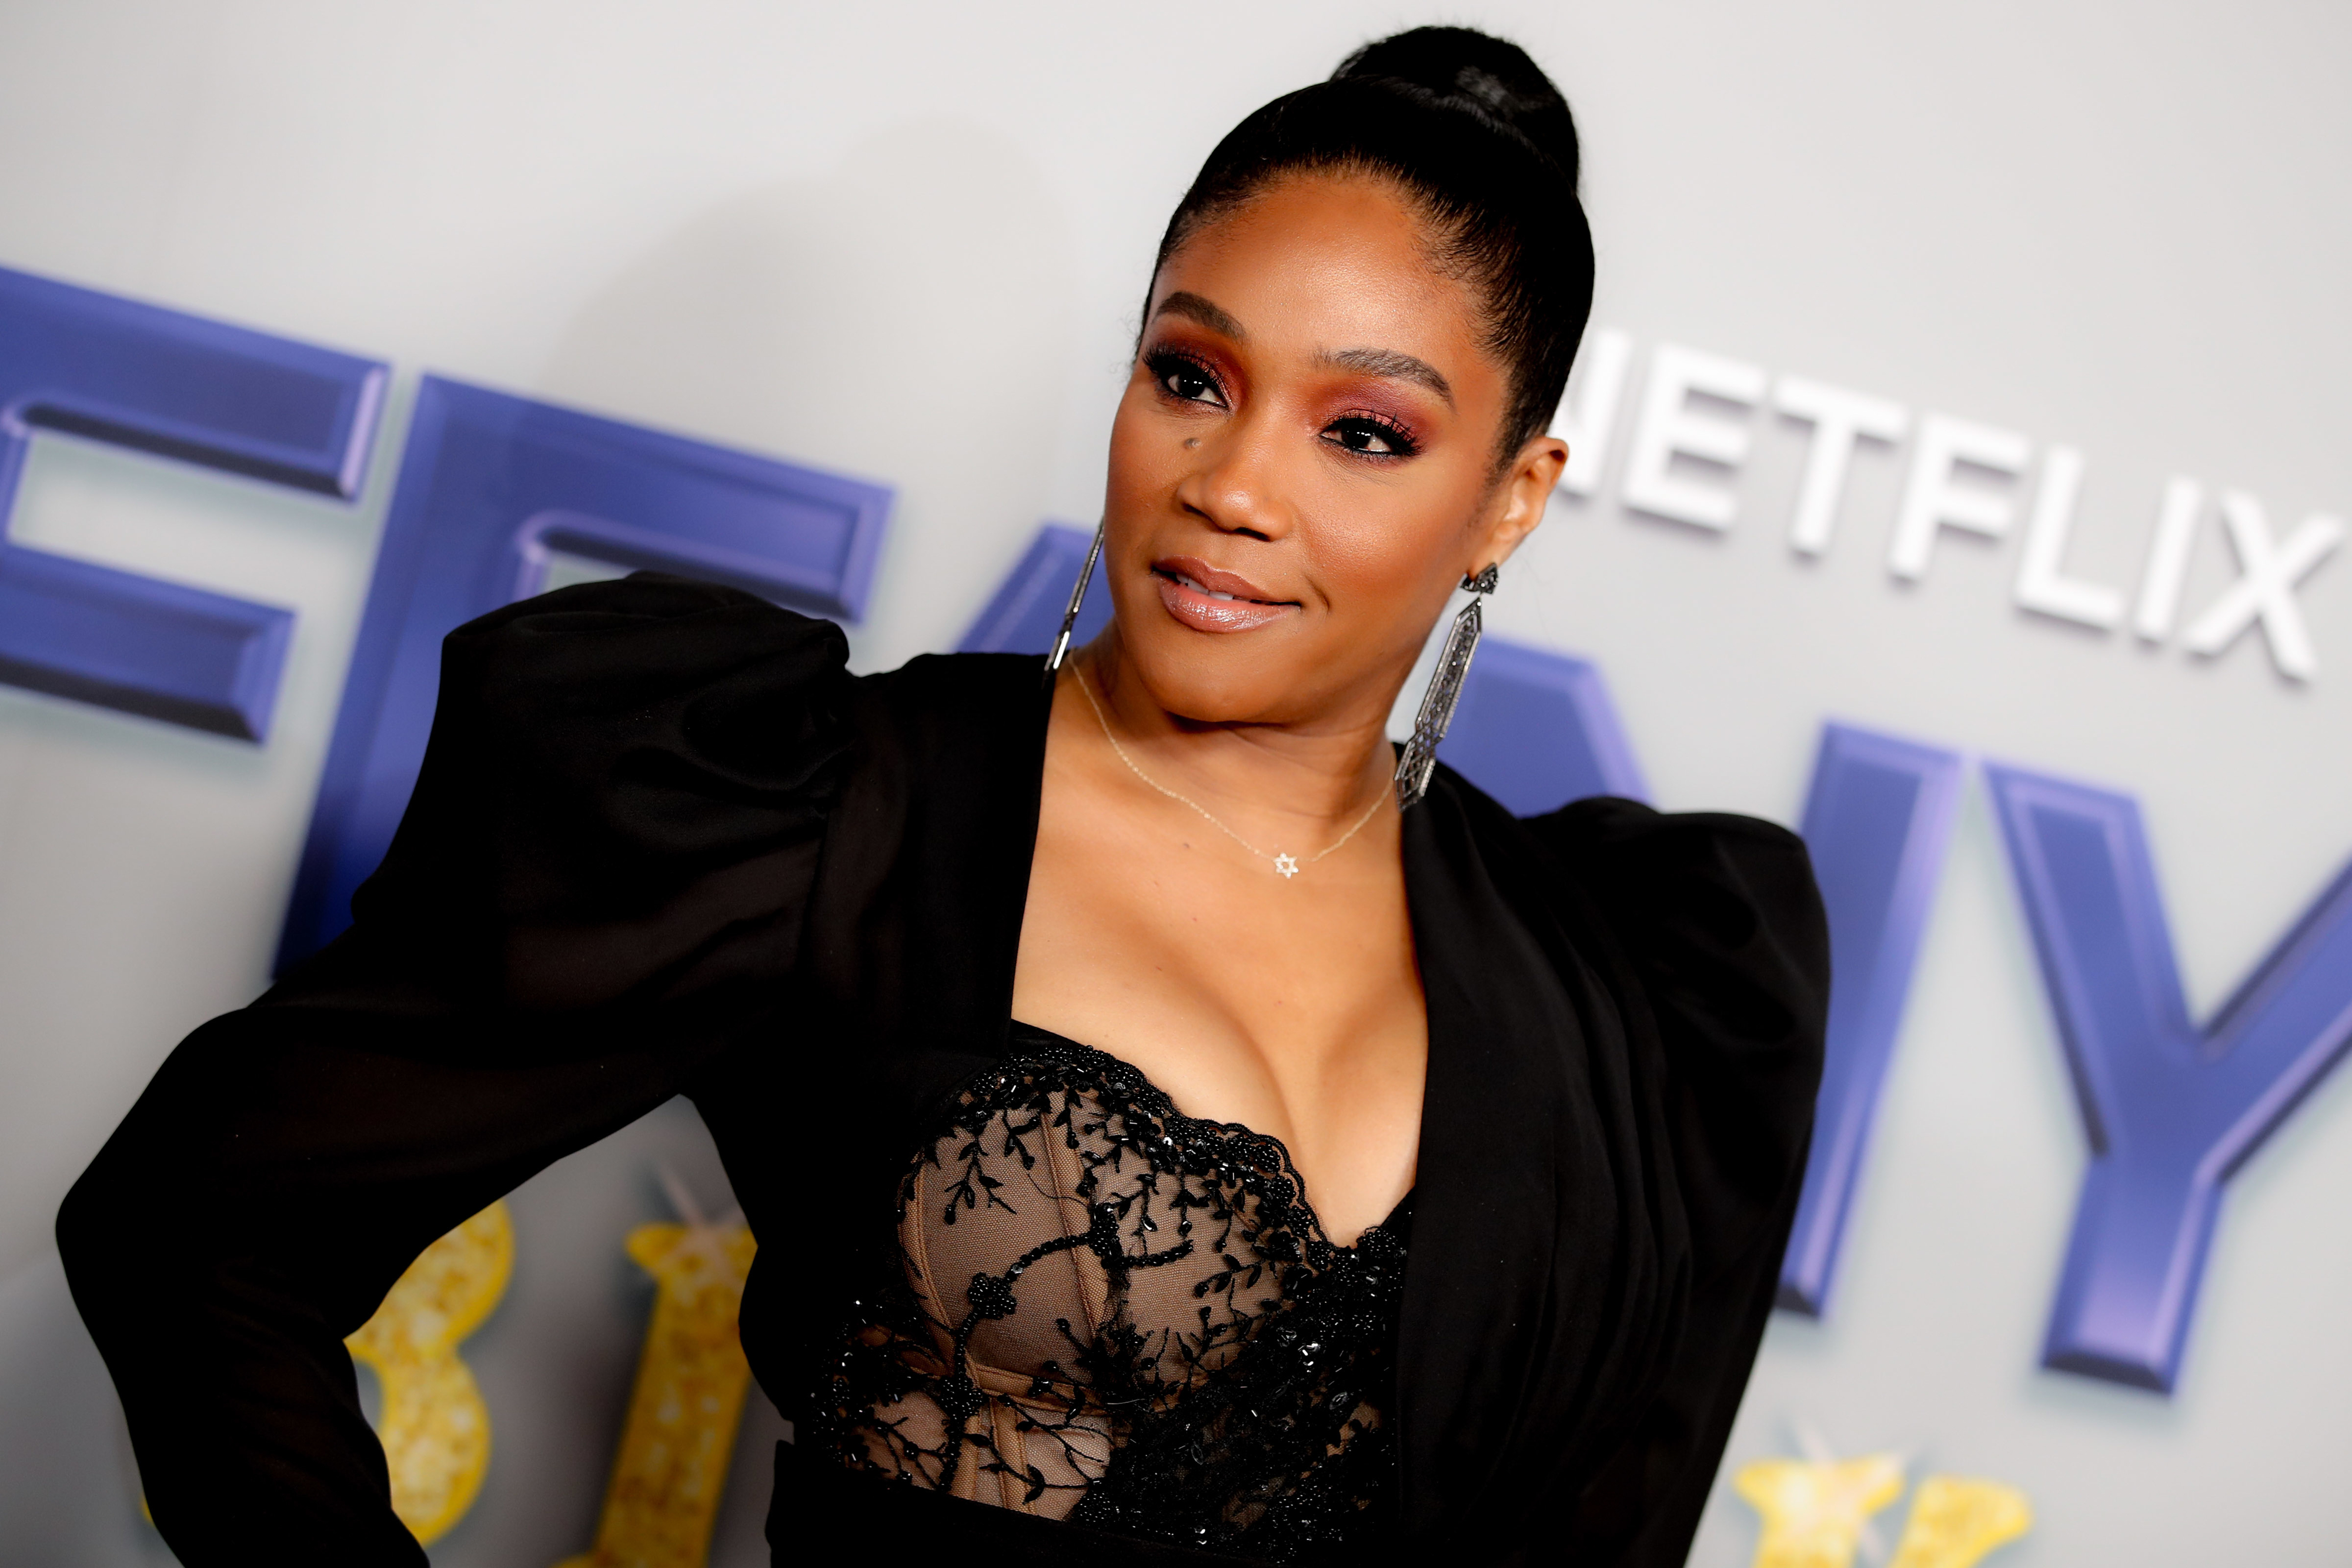 A red carpet image of Tiffany Haddish dressed in black and posing for the camera